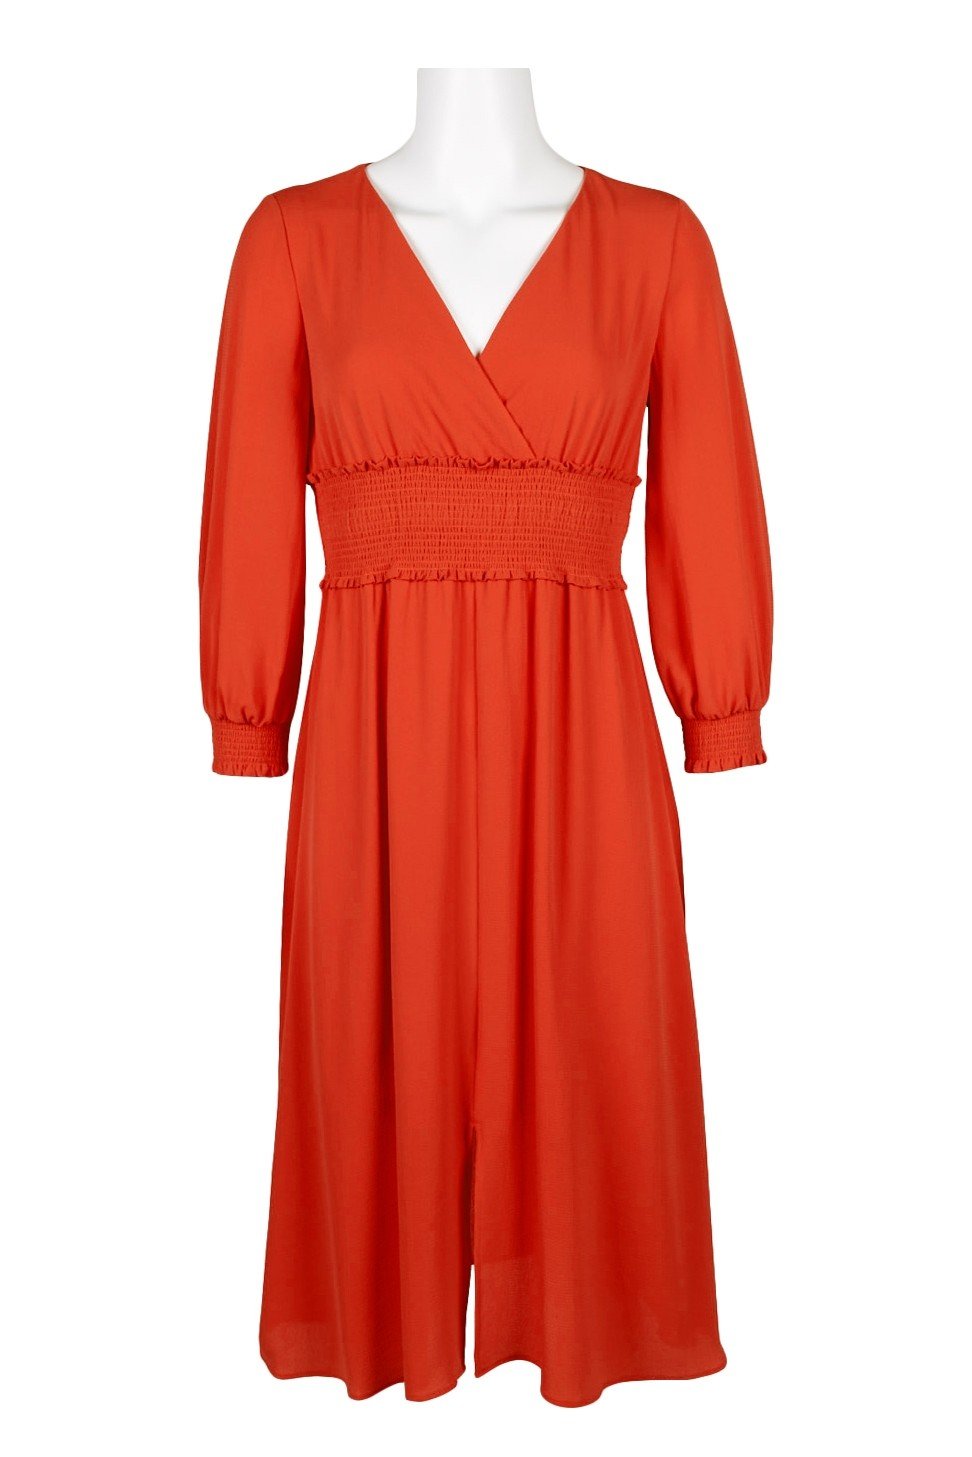 Adrianna Papell - AP1D103500 Long Sleeve V-neck Ruched A-line Dress In Orange